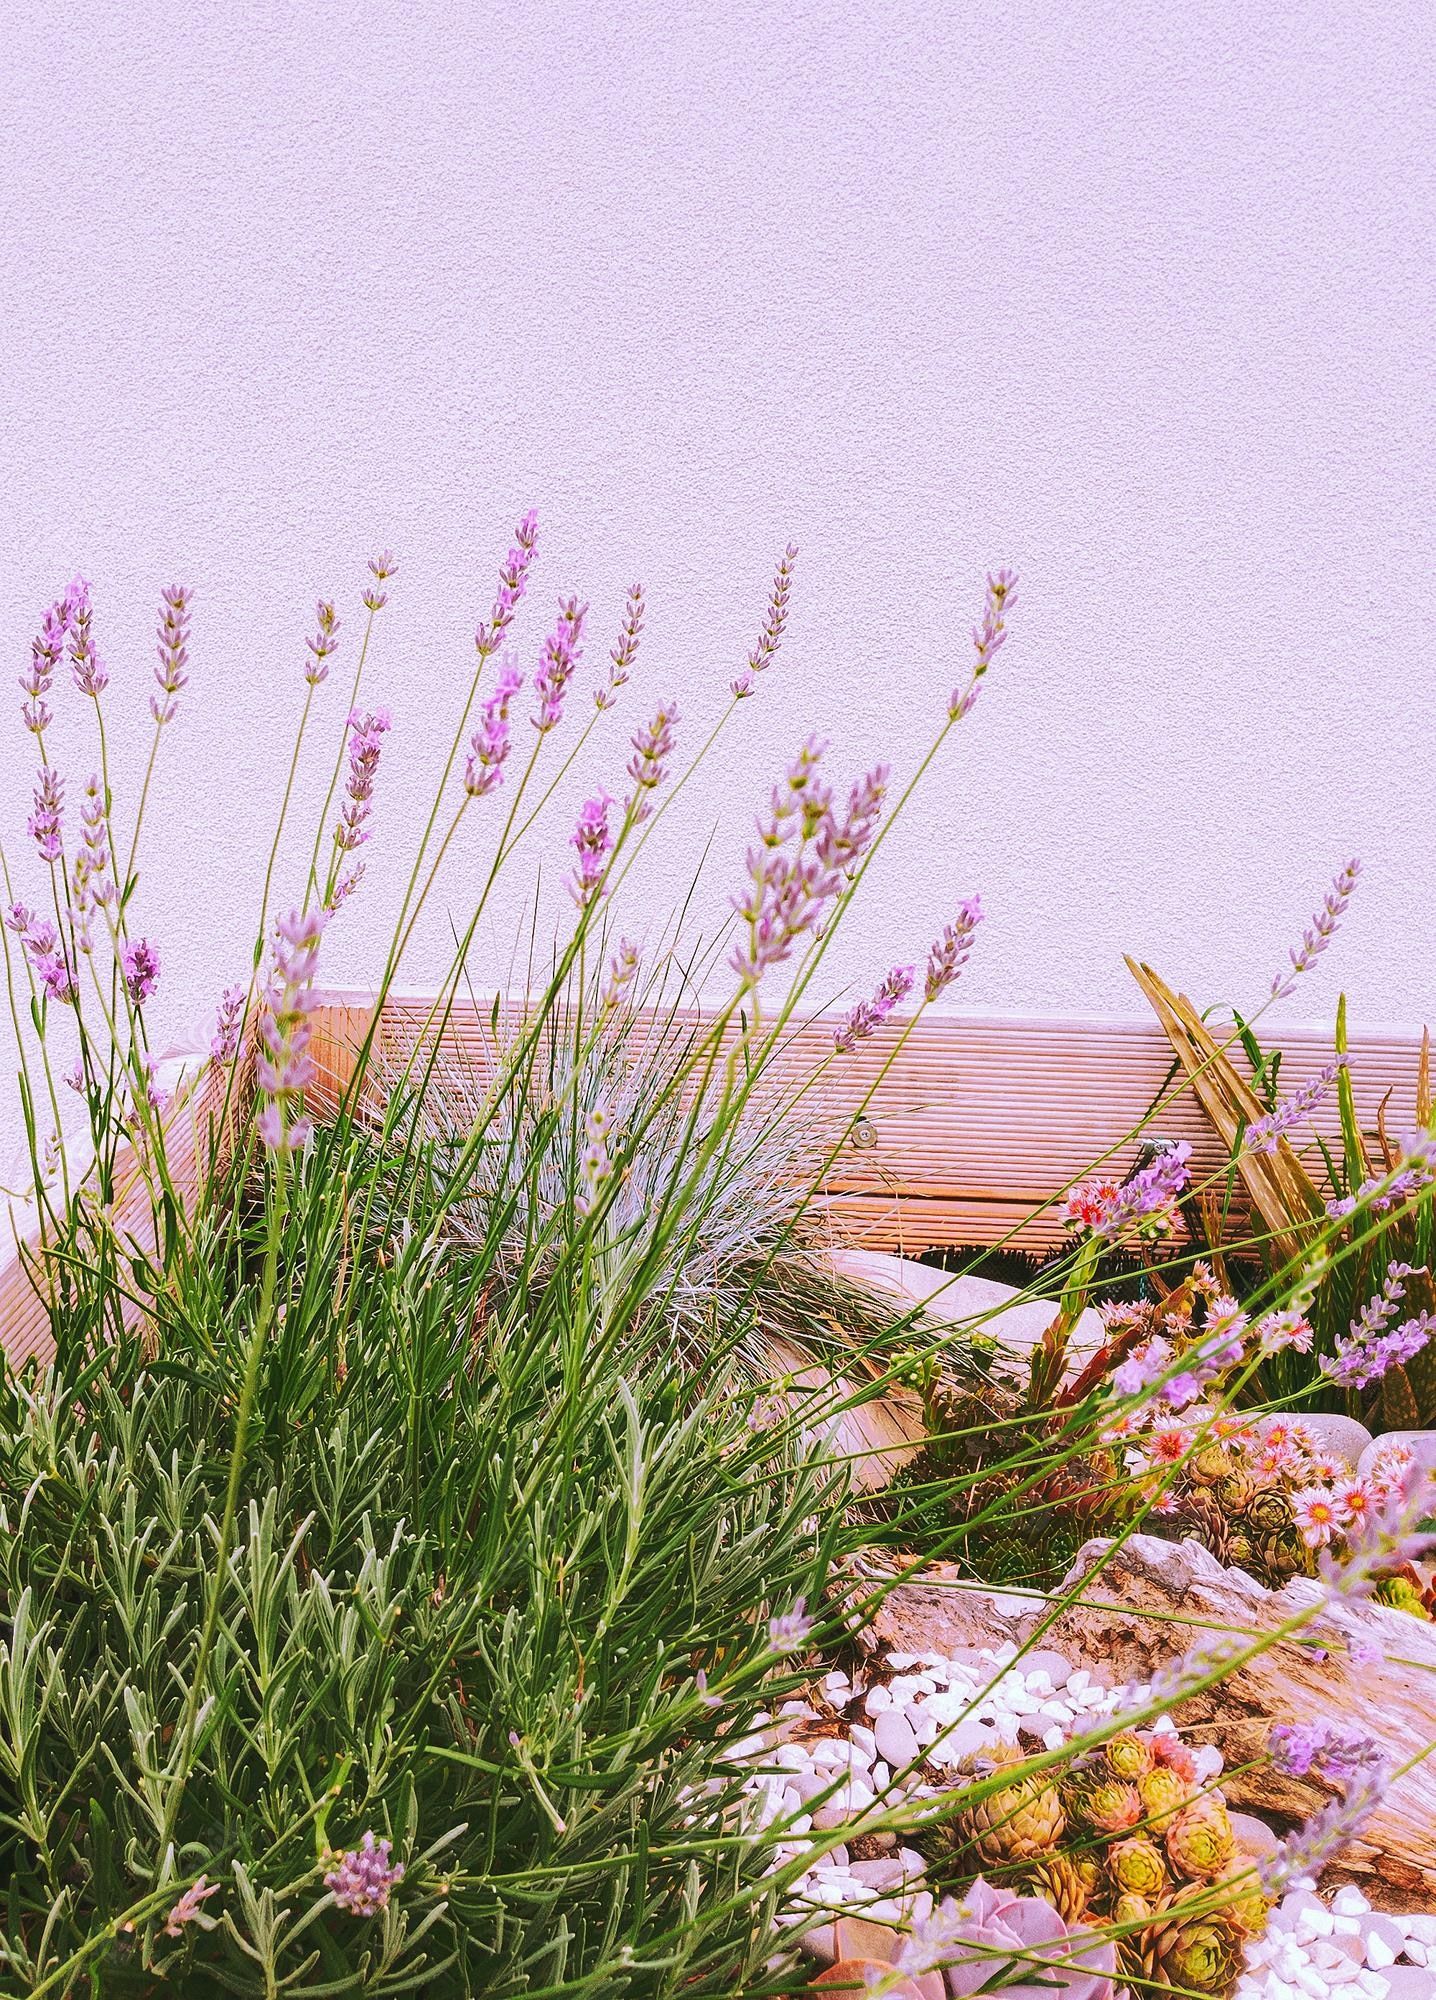 A small garden with flowers and rocks - Lavender